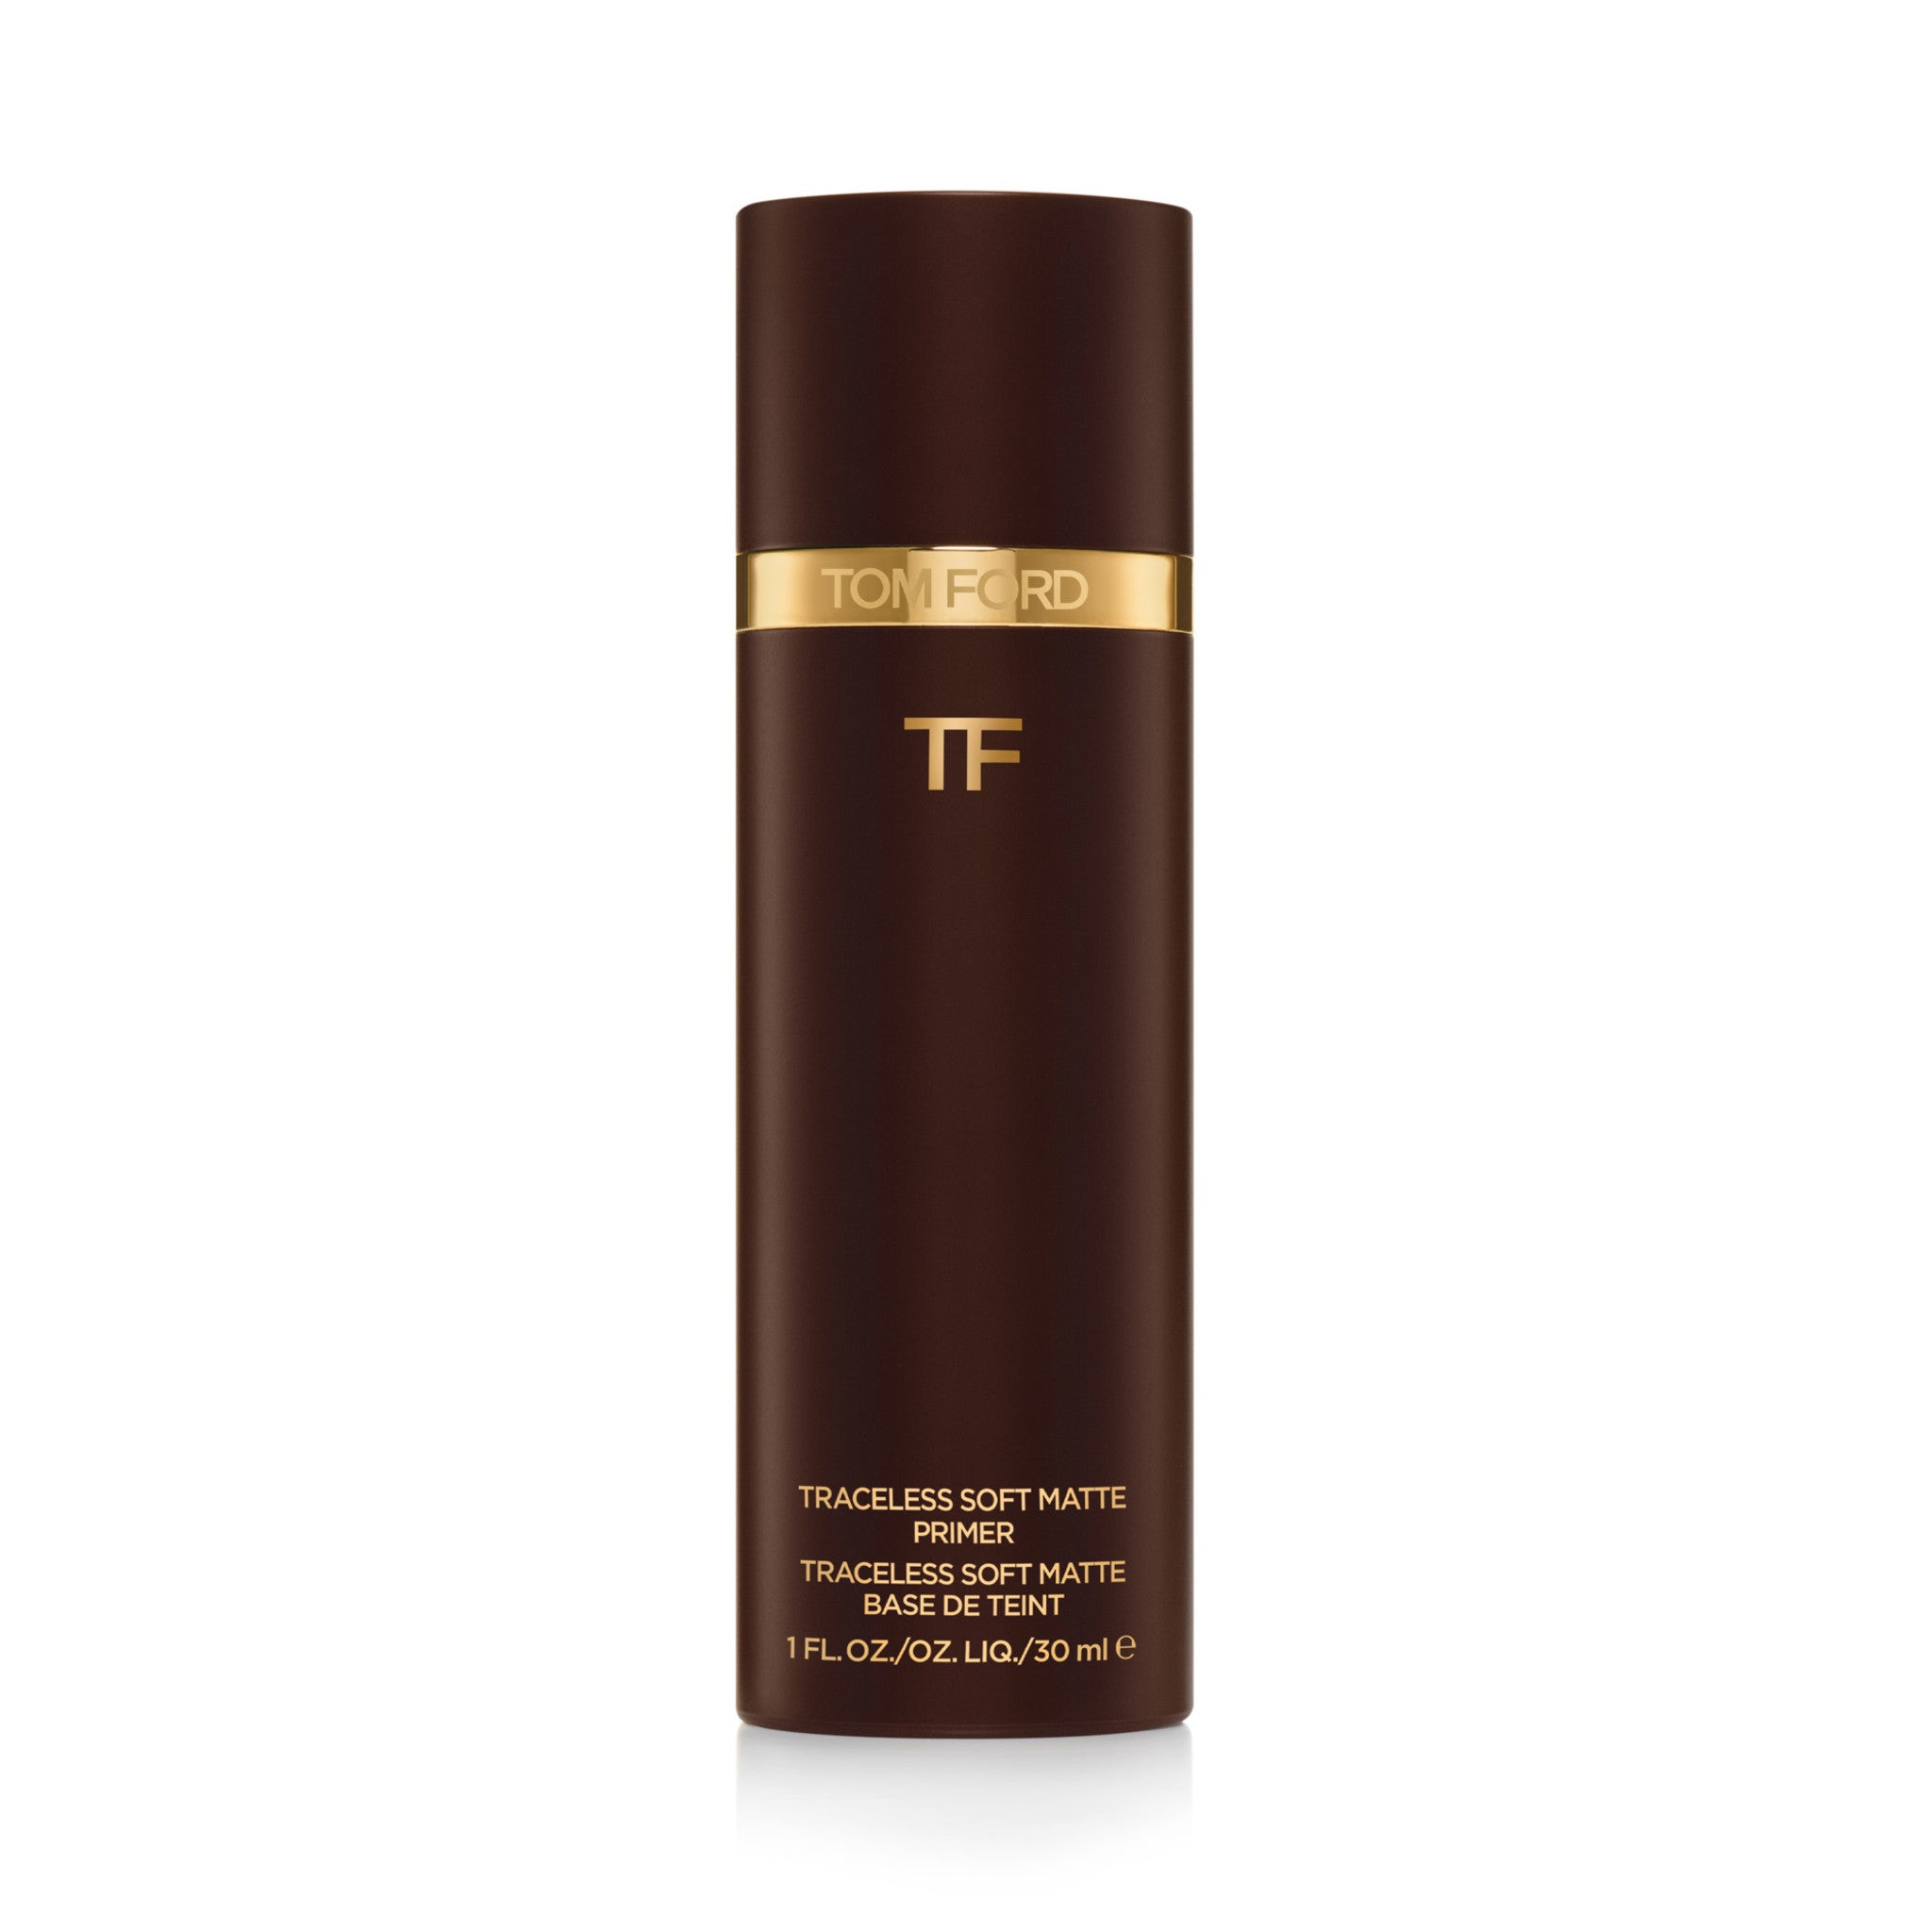 Tom Ford Traceless Soft Matte Primer main image. This product is in the color clear